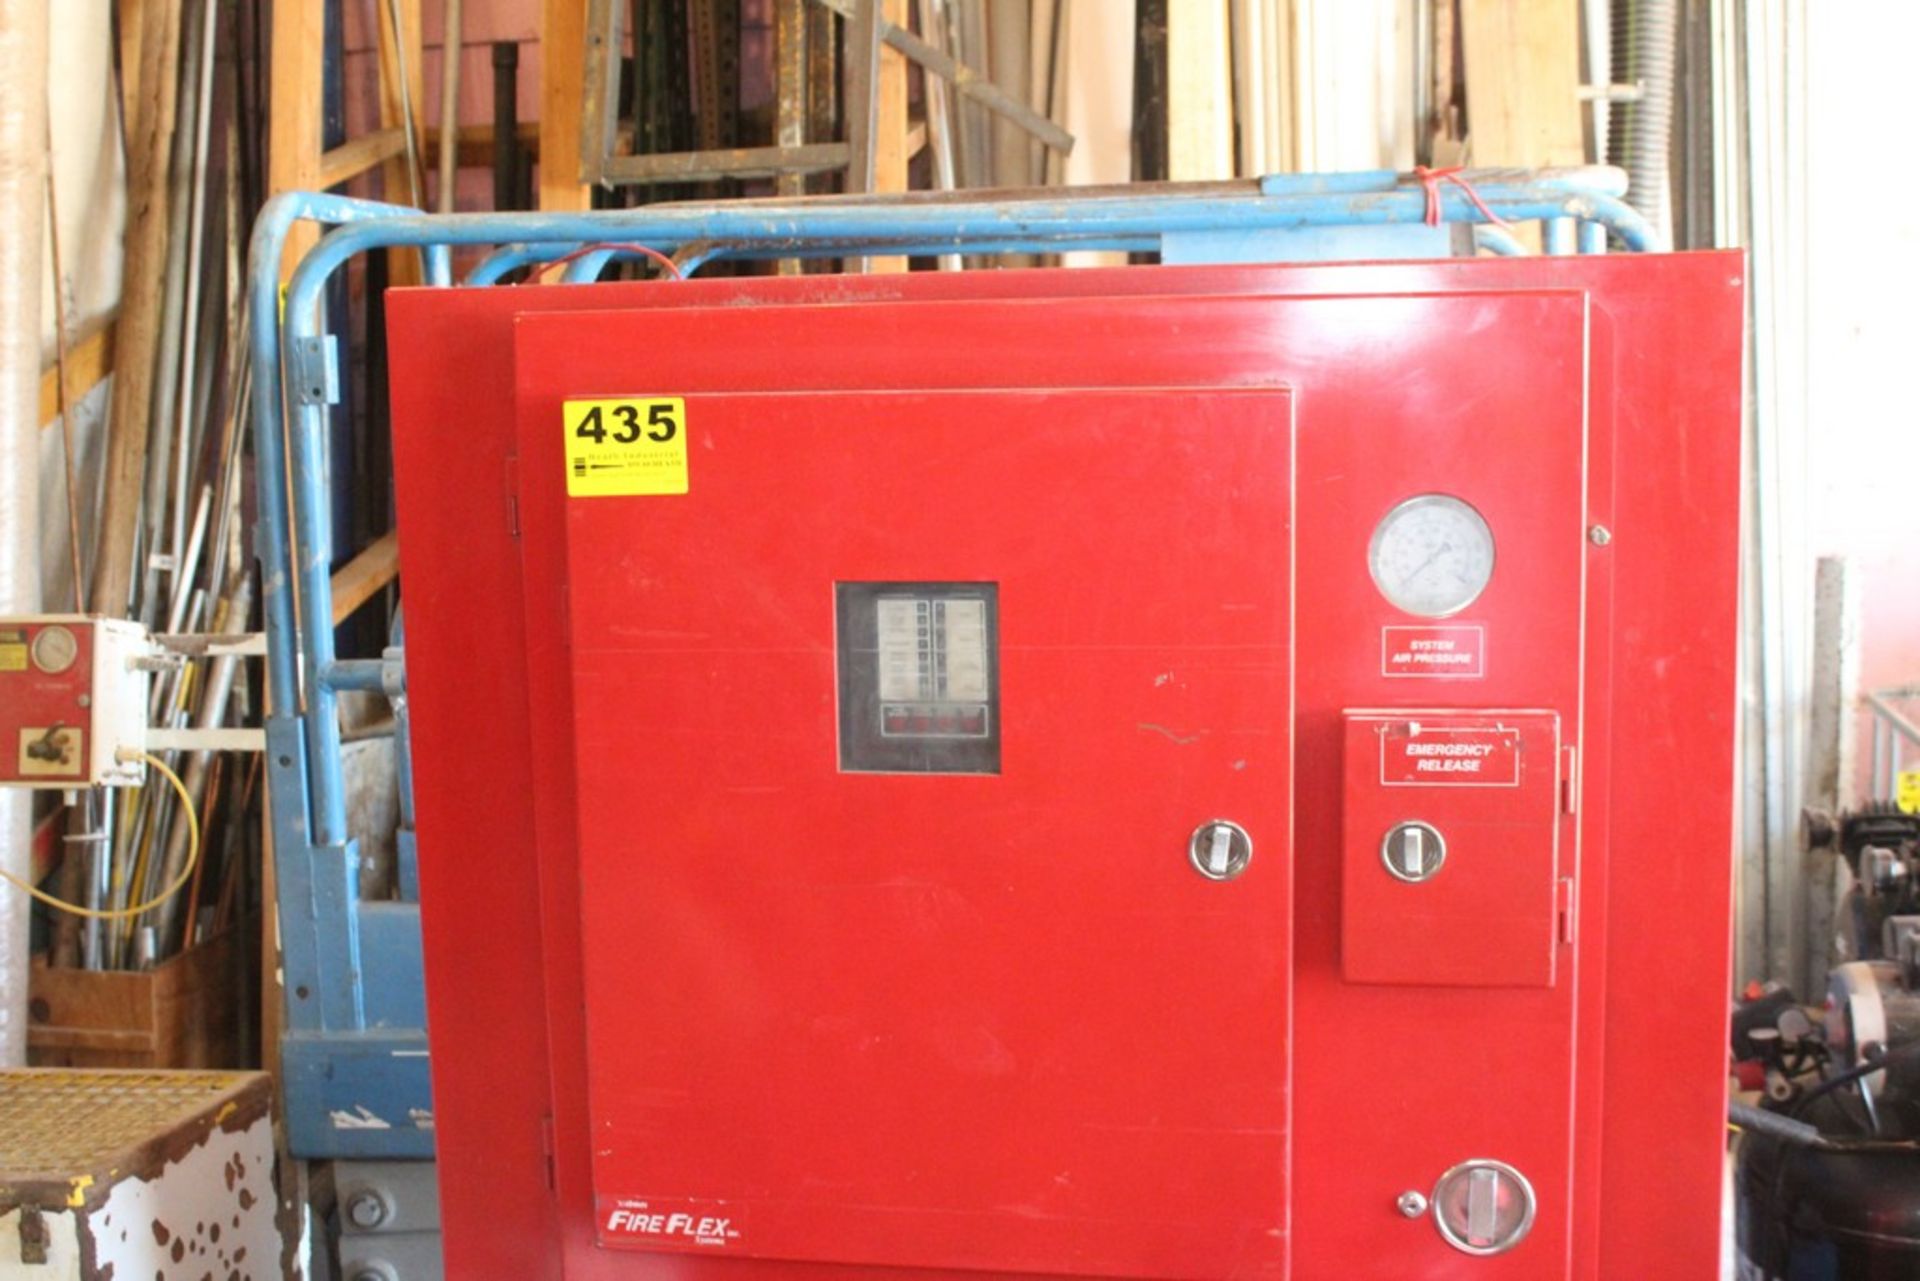 FIRE FLEX TOTAL PAC FIRE PROTECTION SYSTEM COMPLETE WITH HIGH PRESSURE PUMP - Image 2 of 4